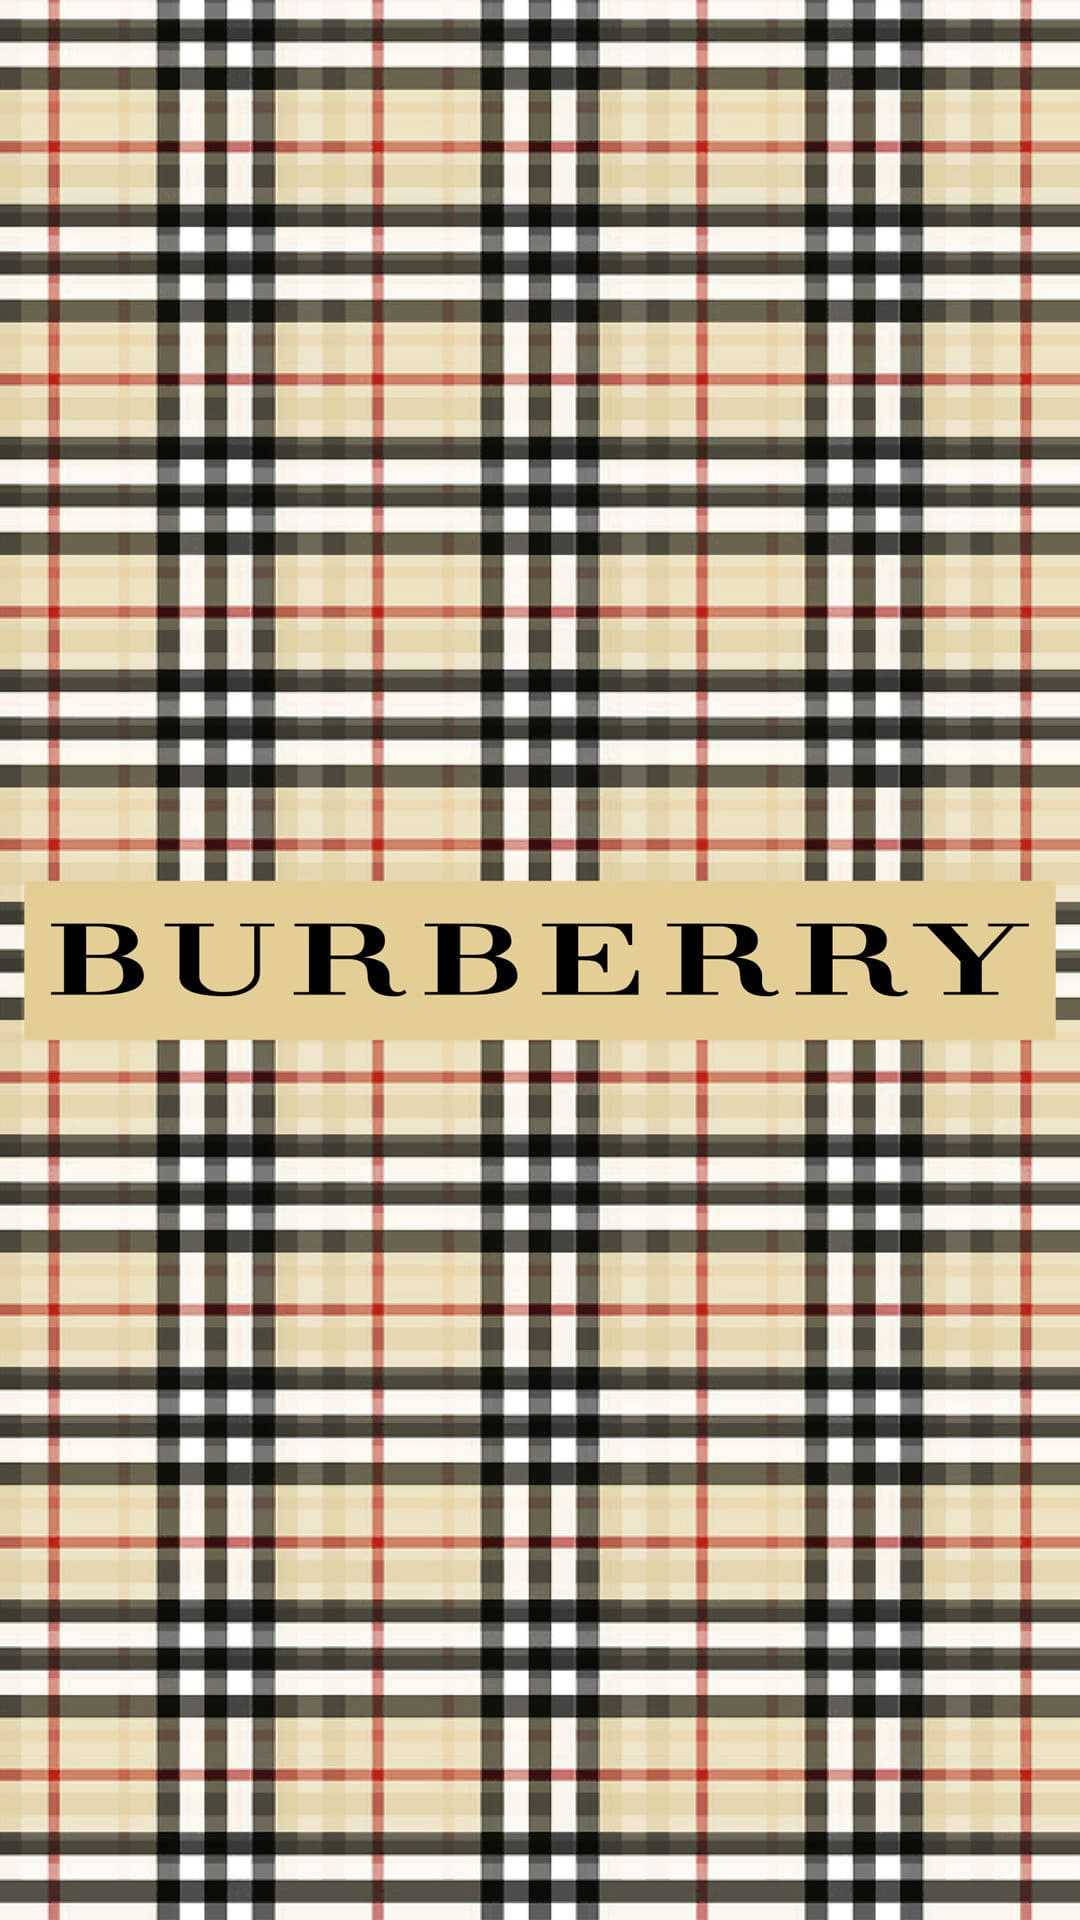 Burberry 1080X1920 Wallpaper and Background Image